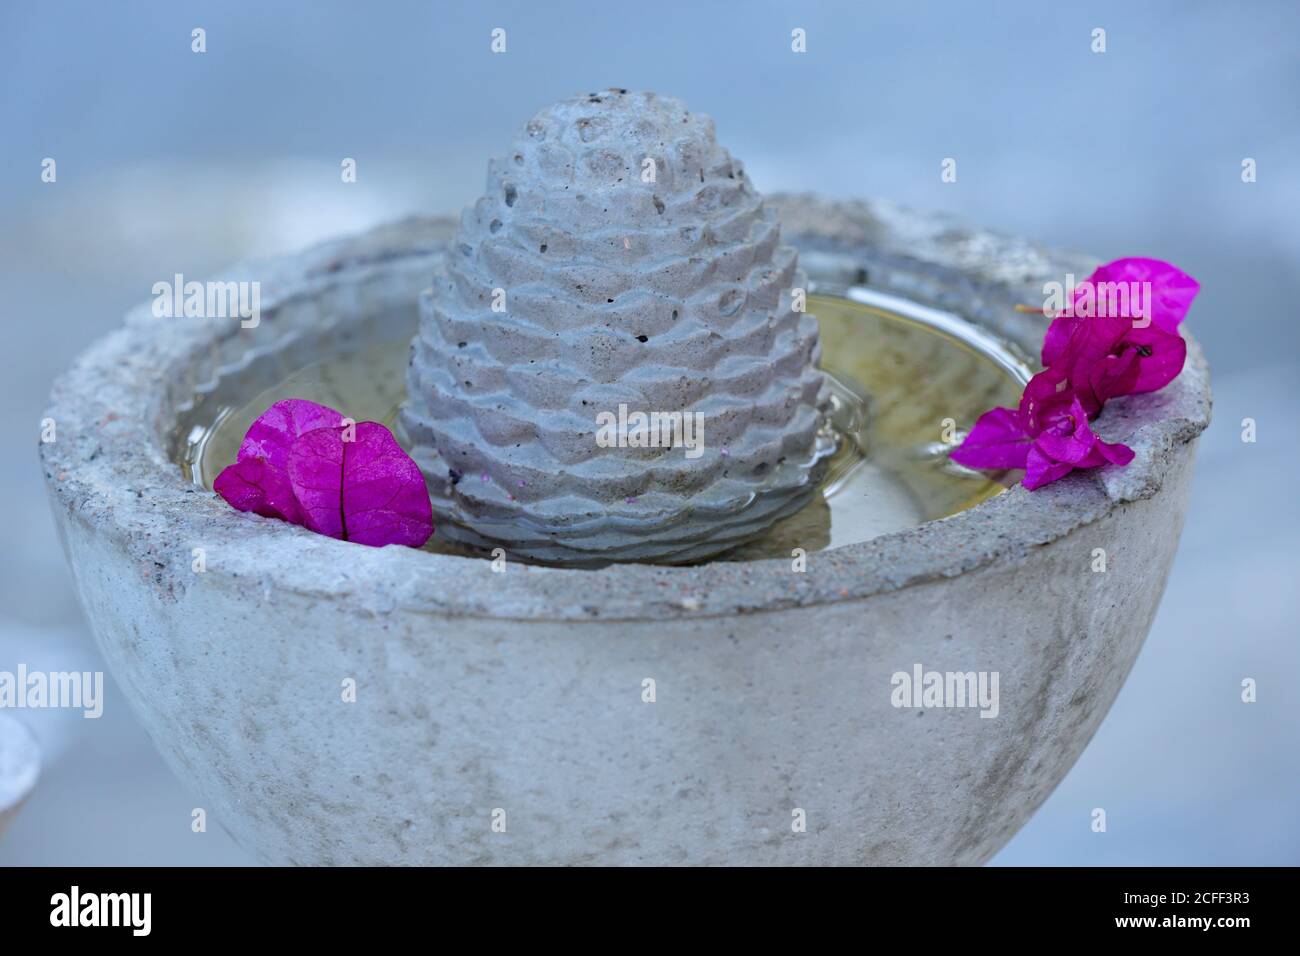 A concrete bowl with purple bougainvillea flowers on the edge Stock Photo